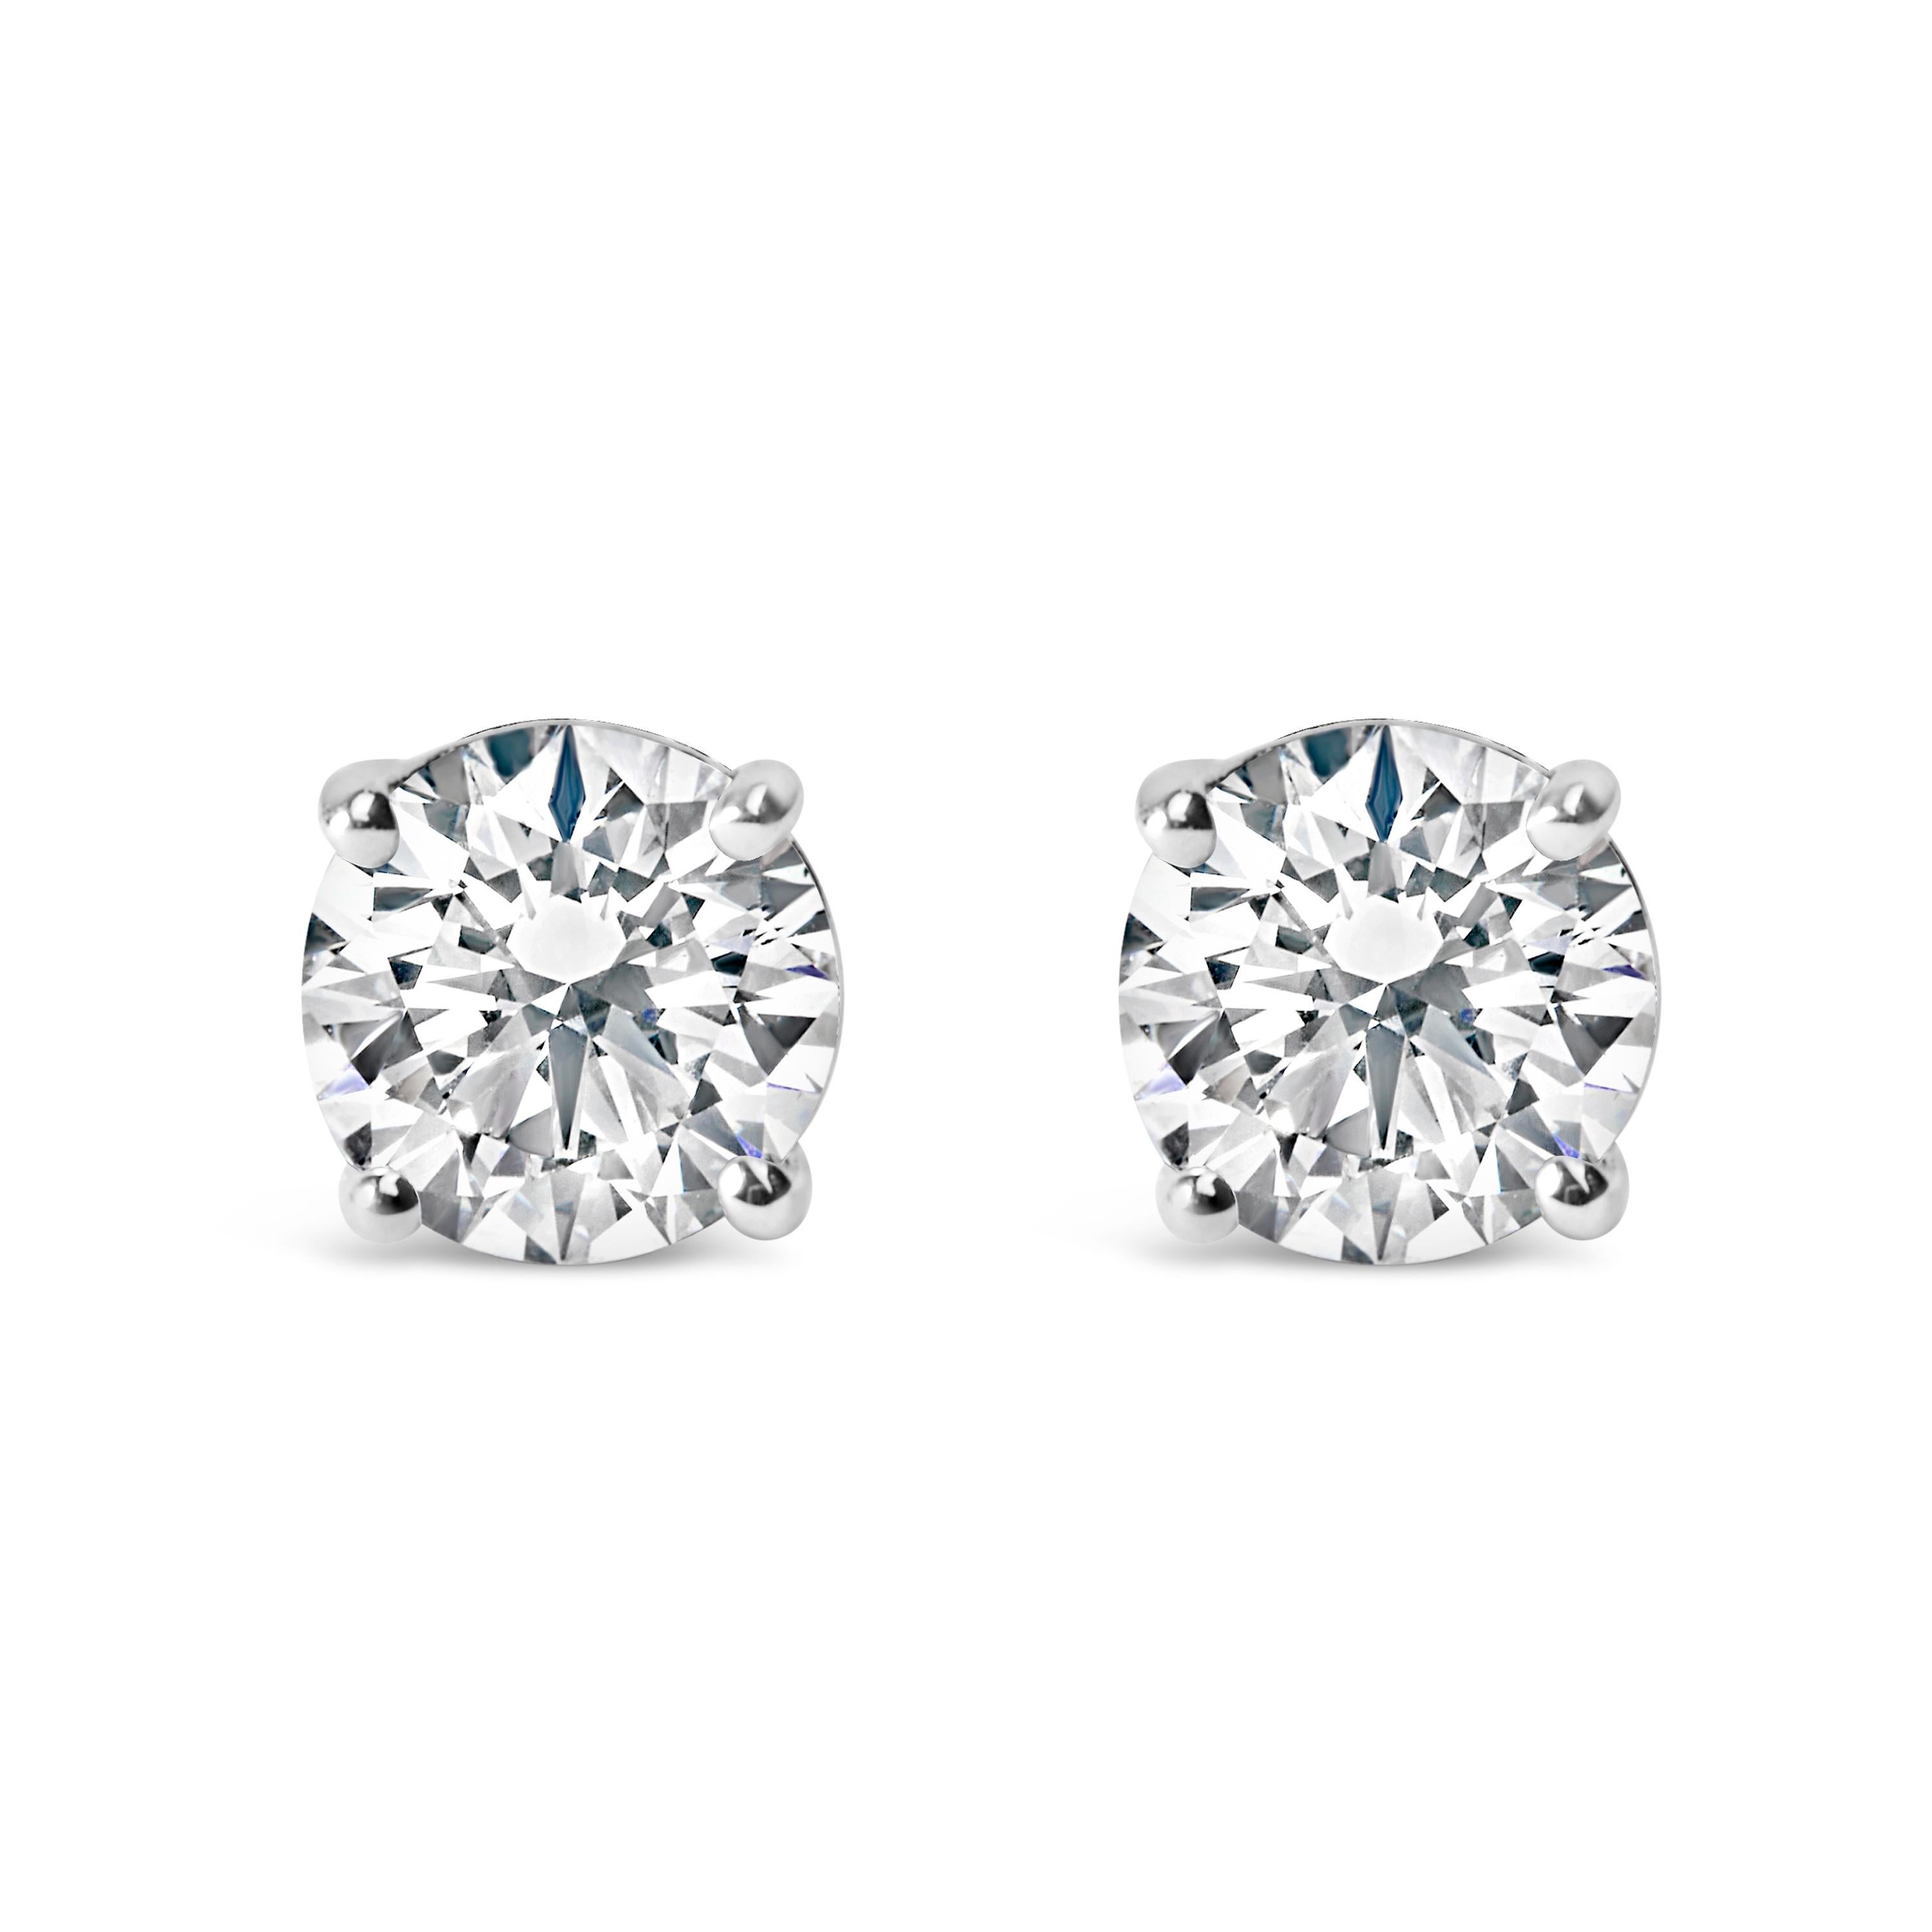 For the poised woman who values everlasting allure, these solitaire diamond studs stand as the pinnacle of sophistication. Magnificently encased in 14k white gold, each stud is graced with a real brilliant-cut diamond, collectively summing up to 1